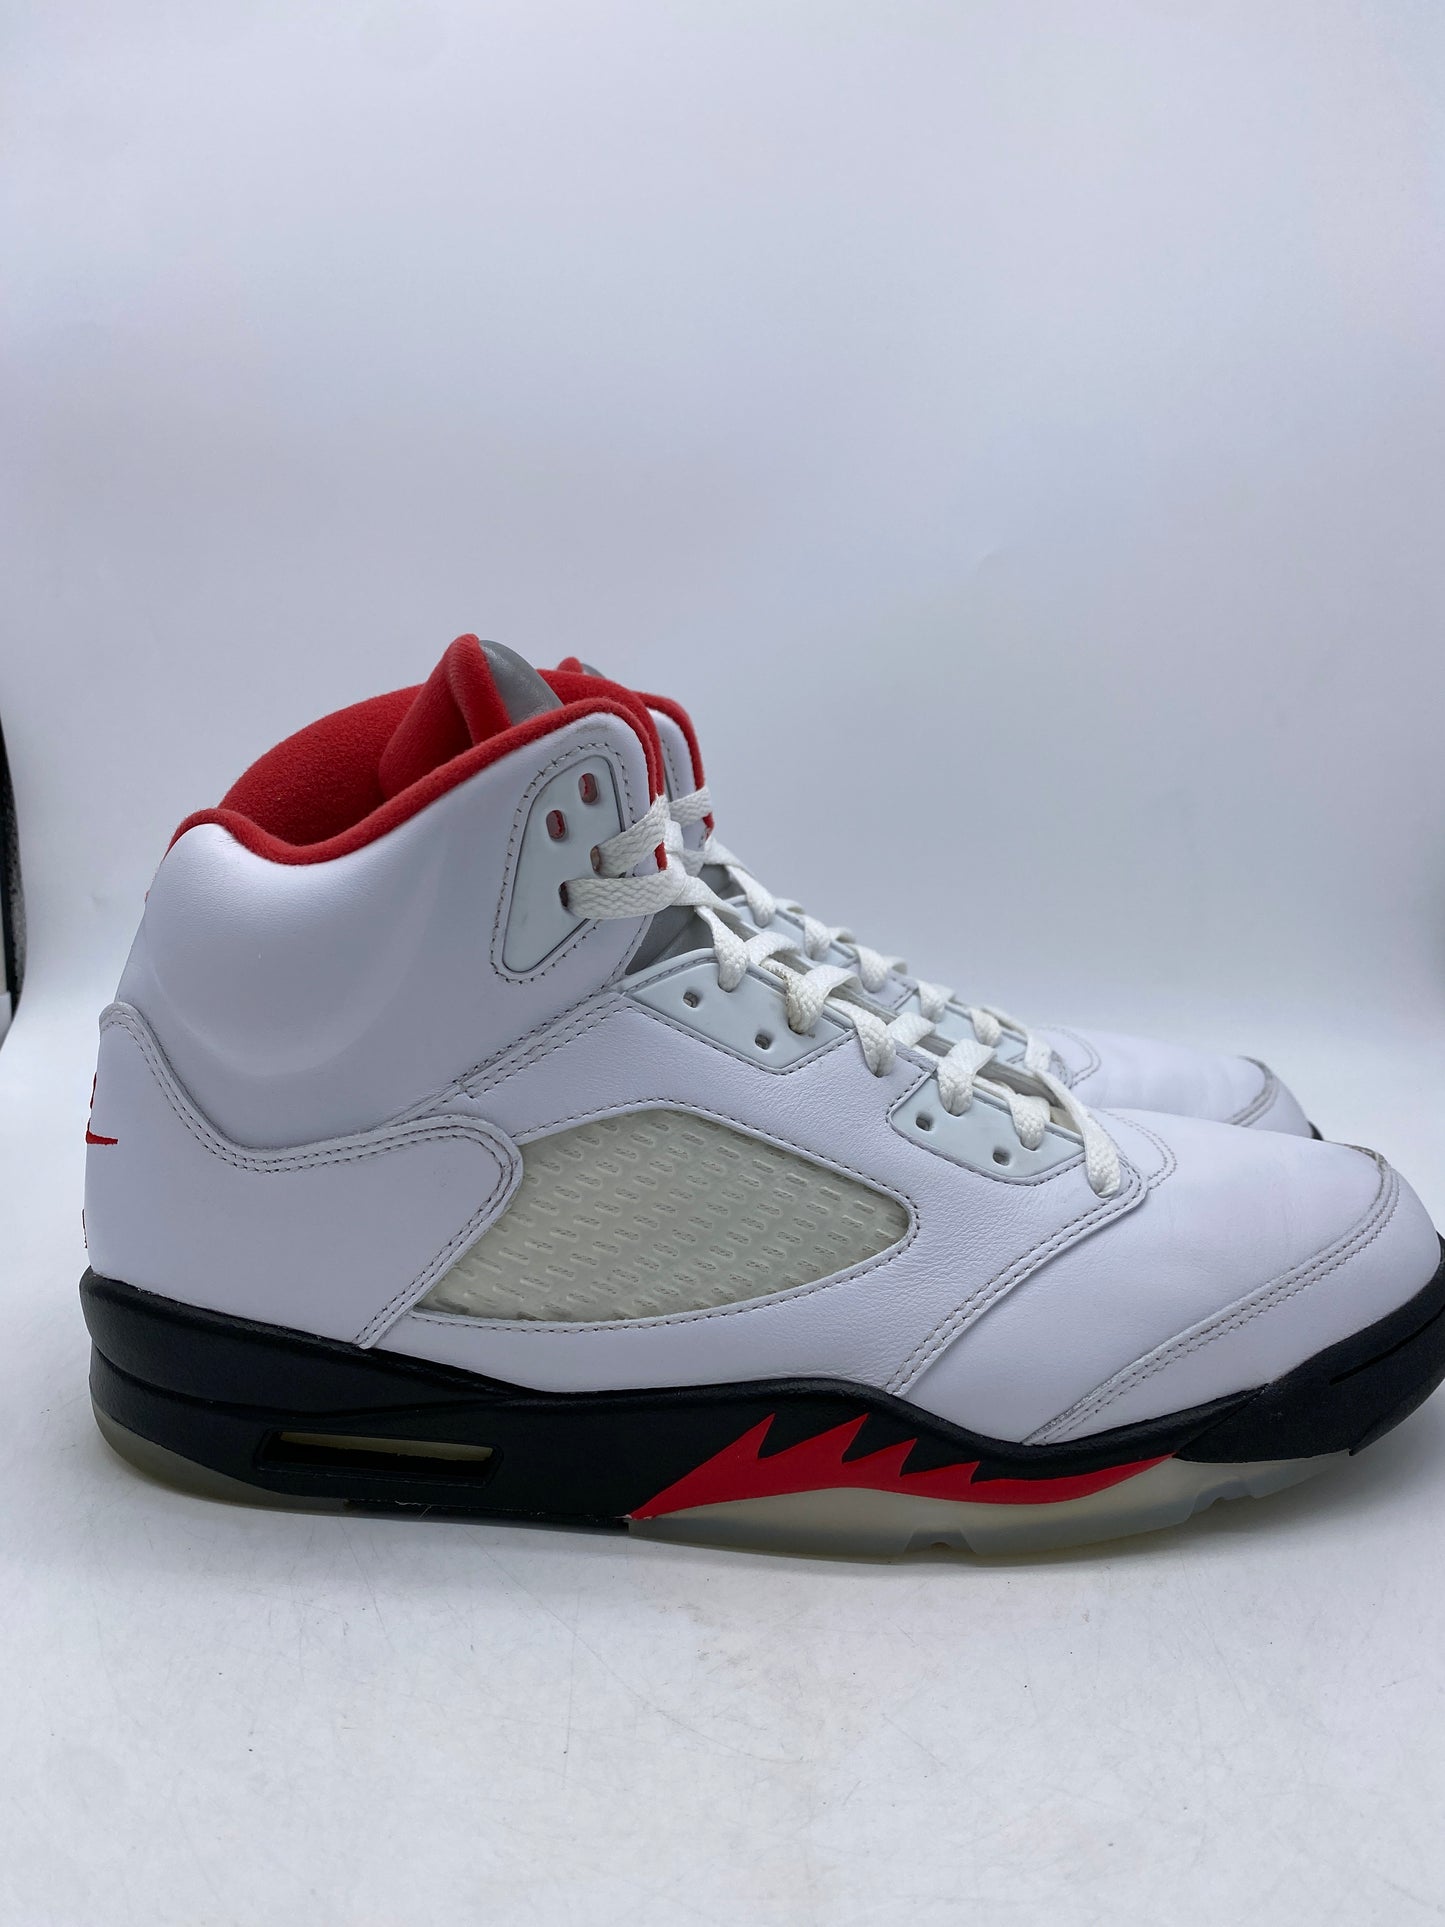 Load image into Gallery viewer, Preowned Jordan 5 Retro Fire Red Silver Tongue Sz 13M/14.5W
